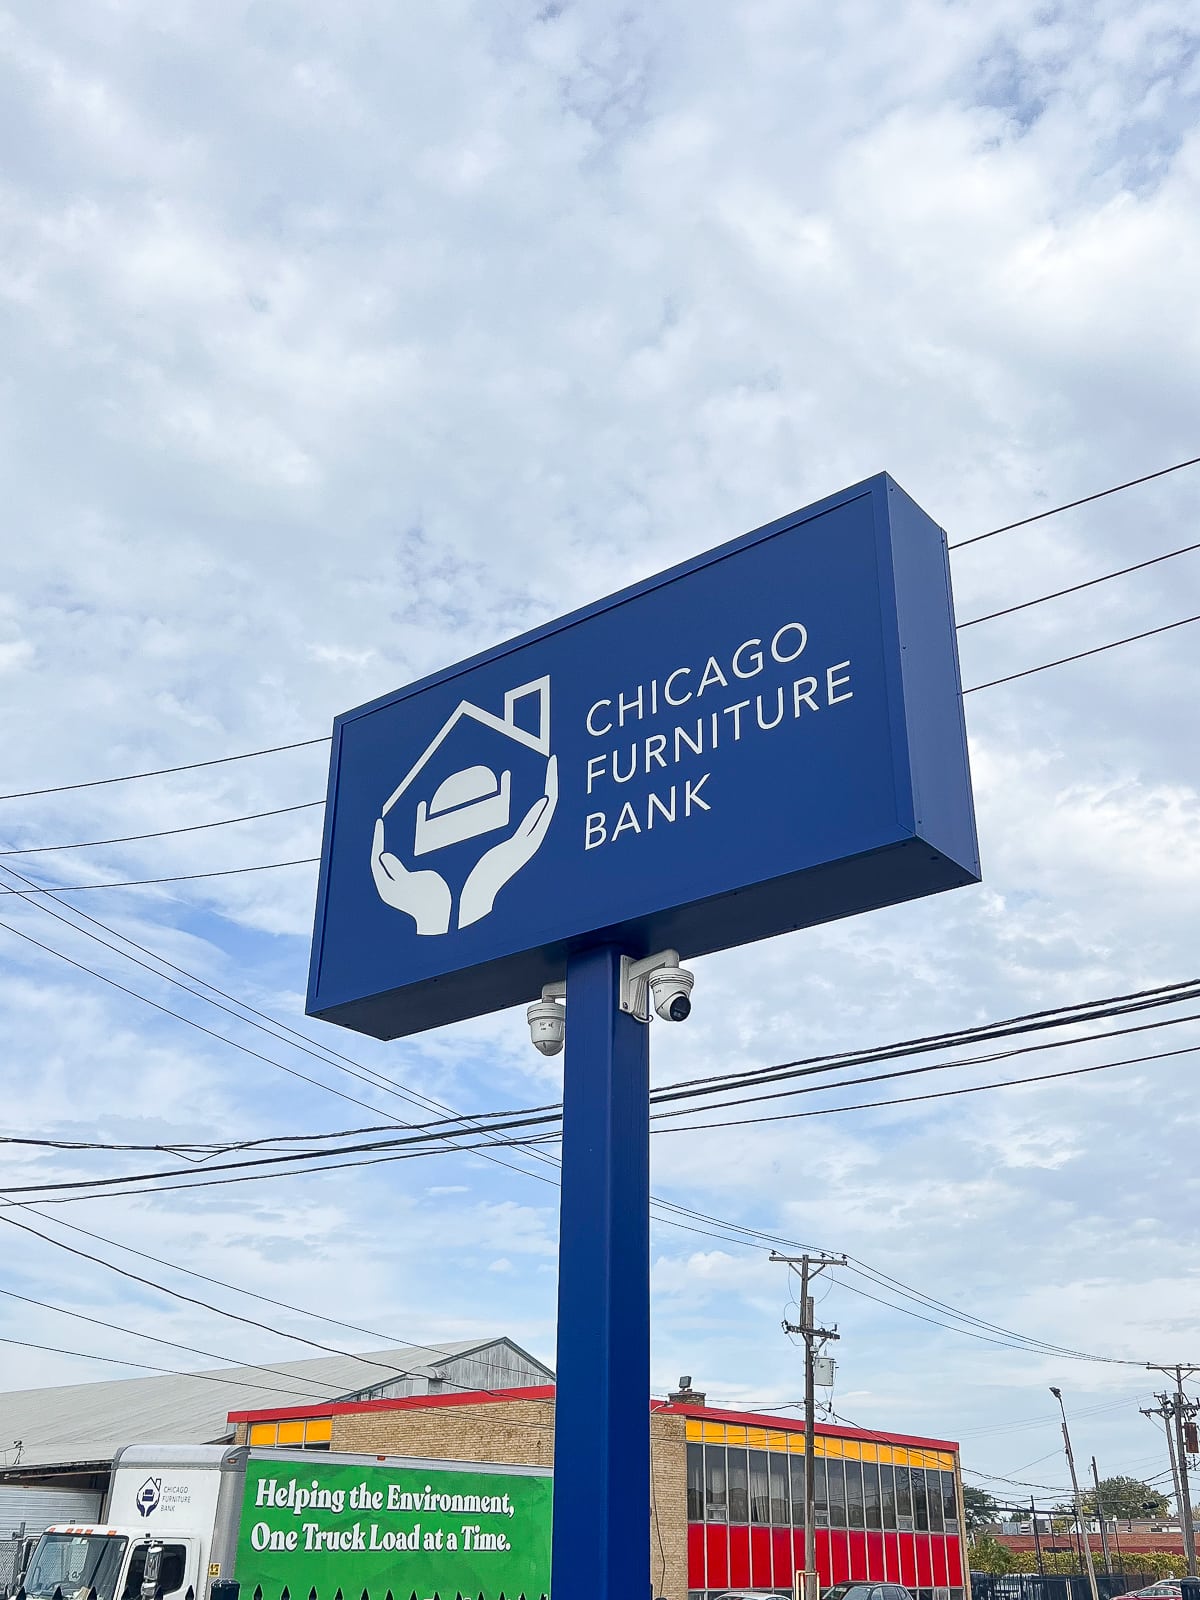 The Chicago Furniture Bank